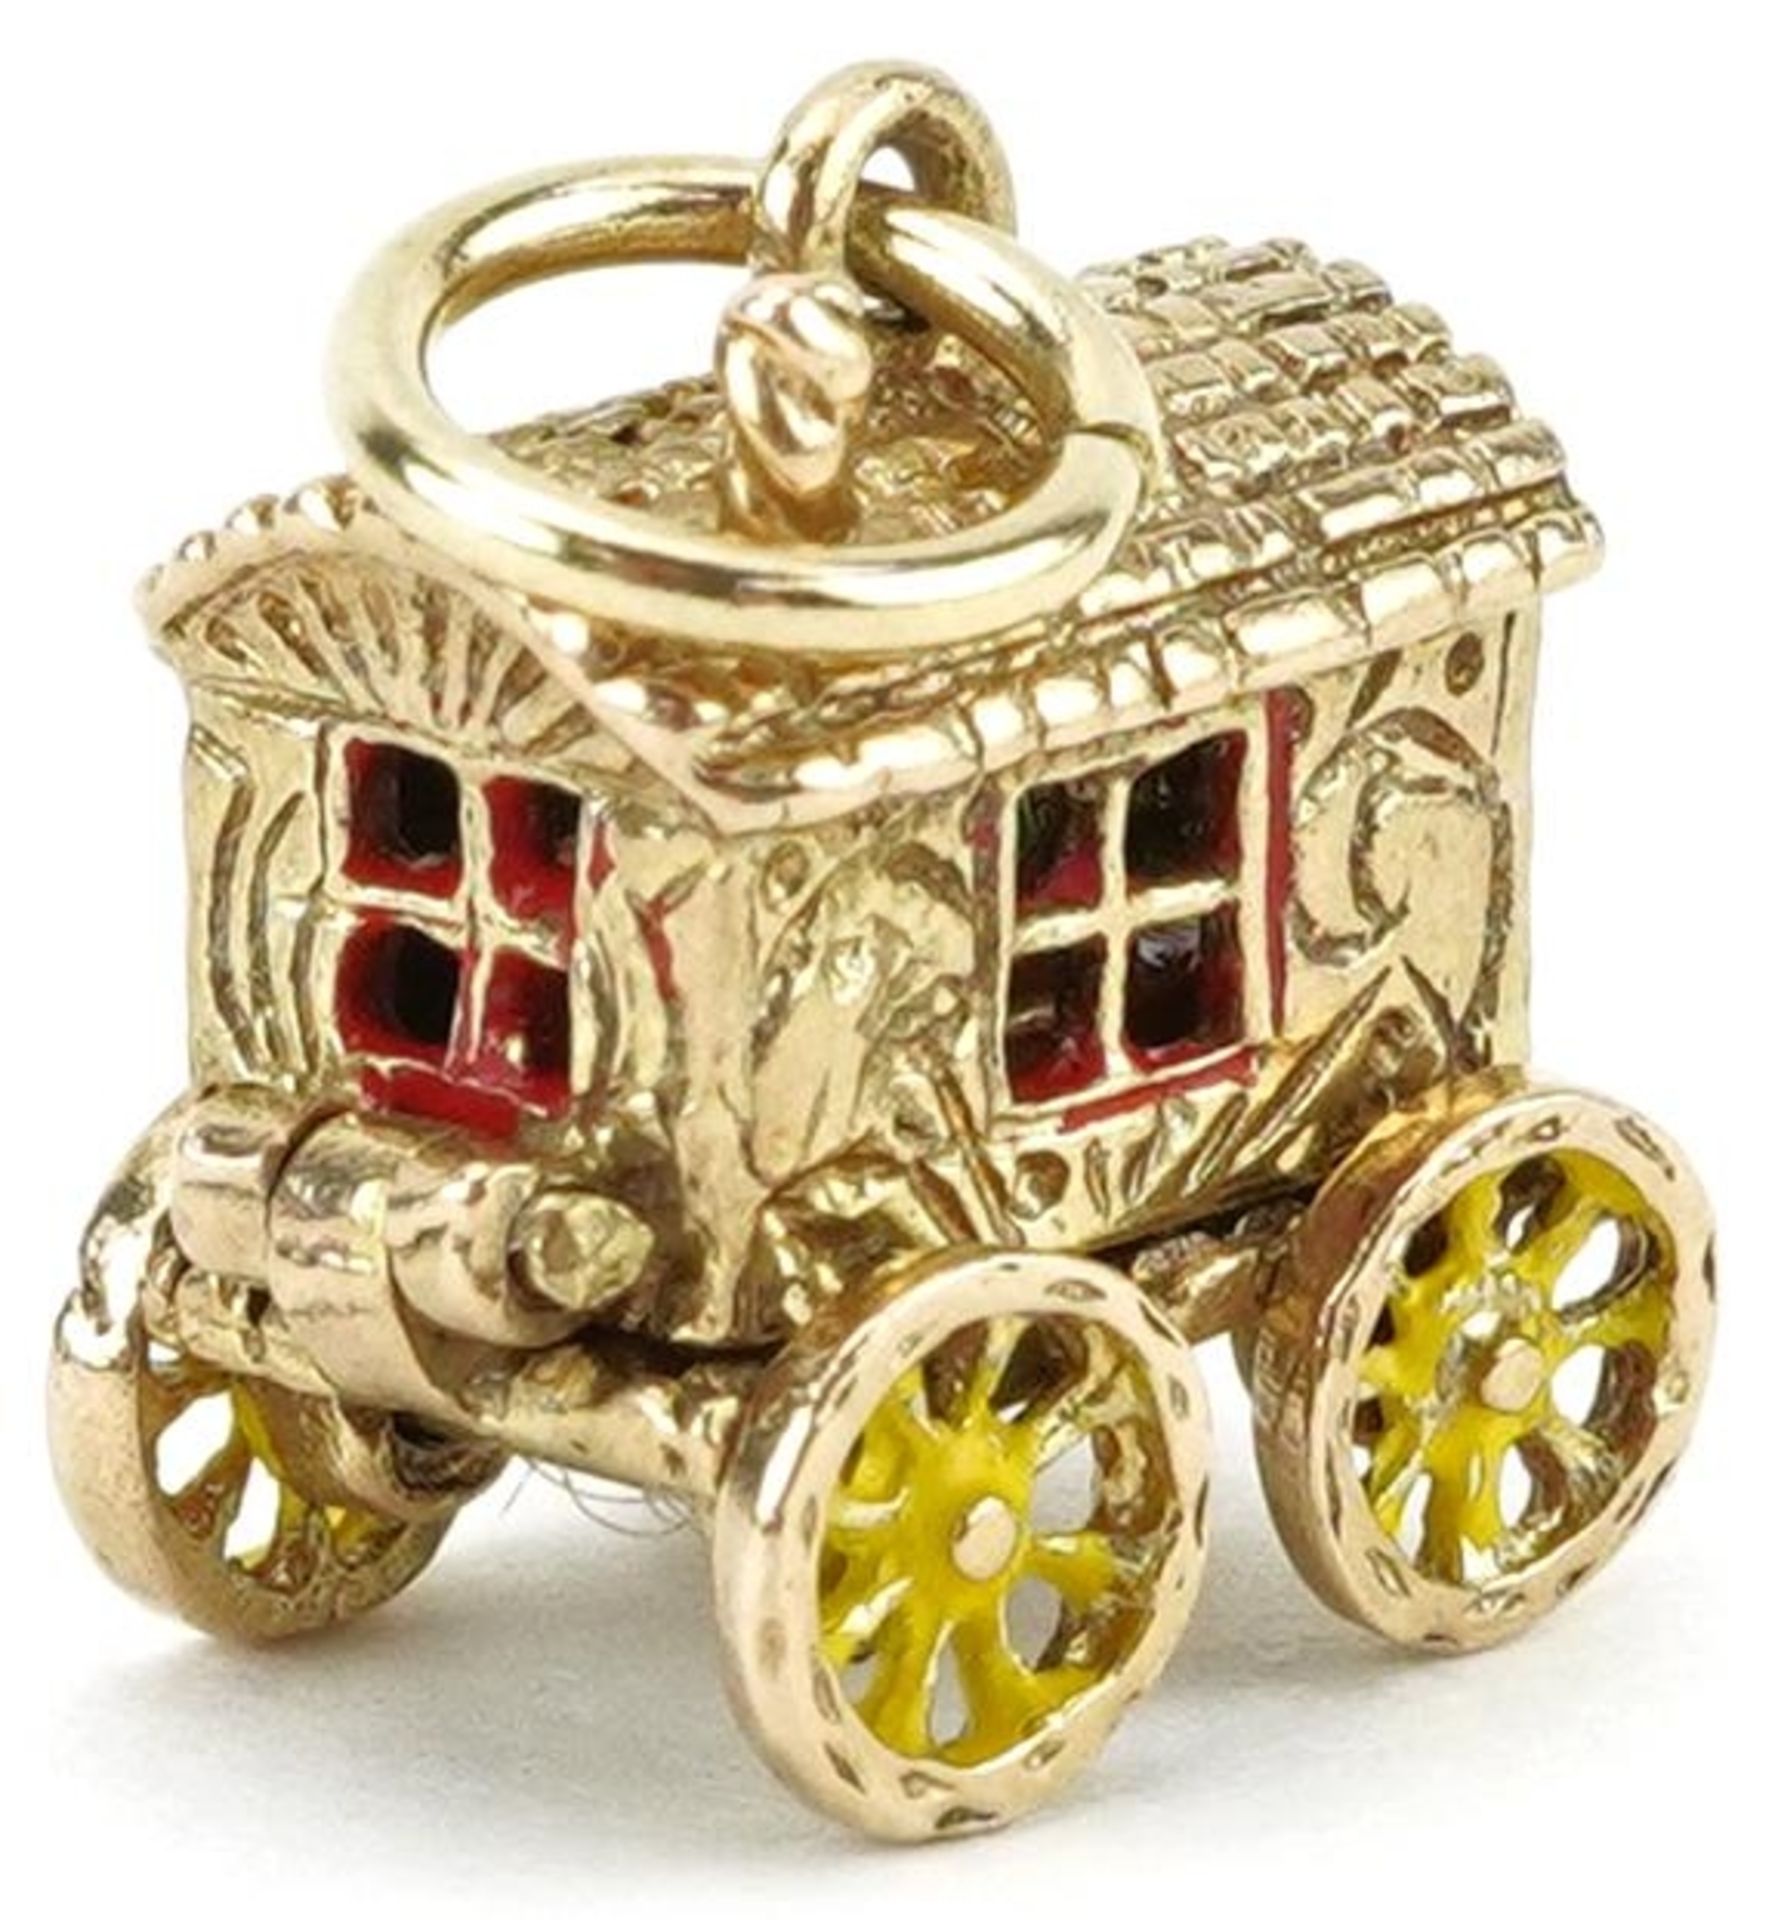 9ct gold and enamel charm in the form of a Gypsy wagon with rotating wheels opening to reveal a - Image 3 of 4